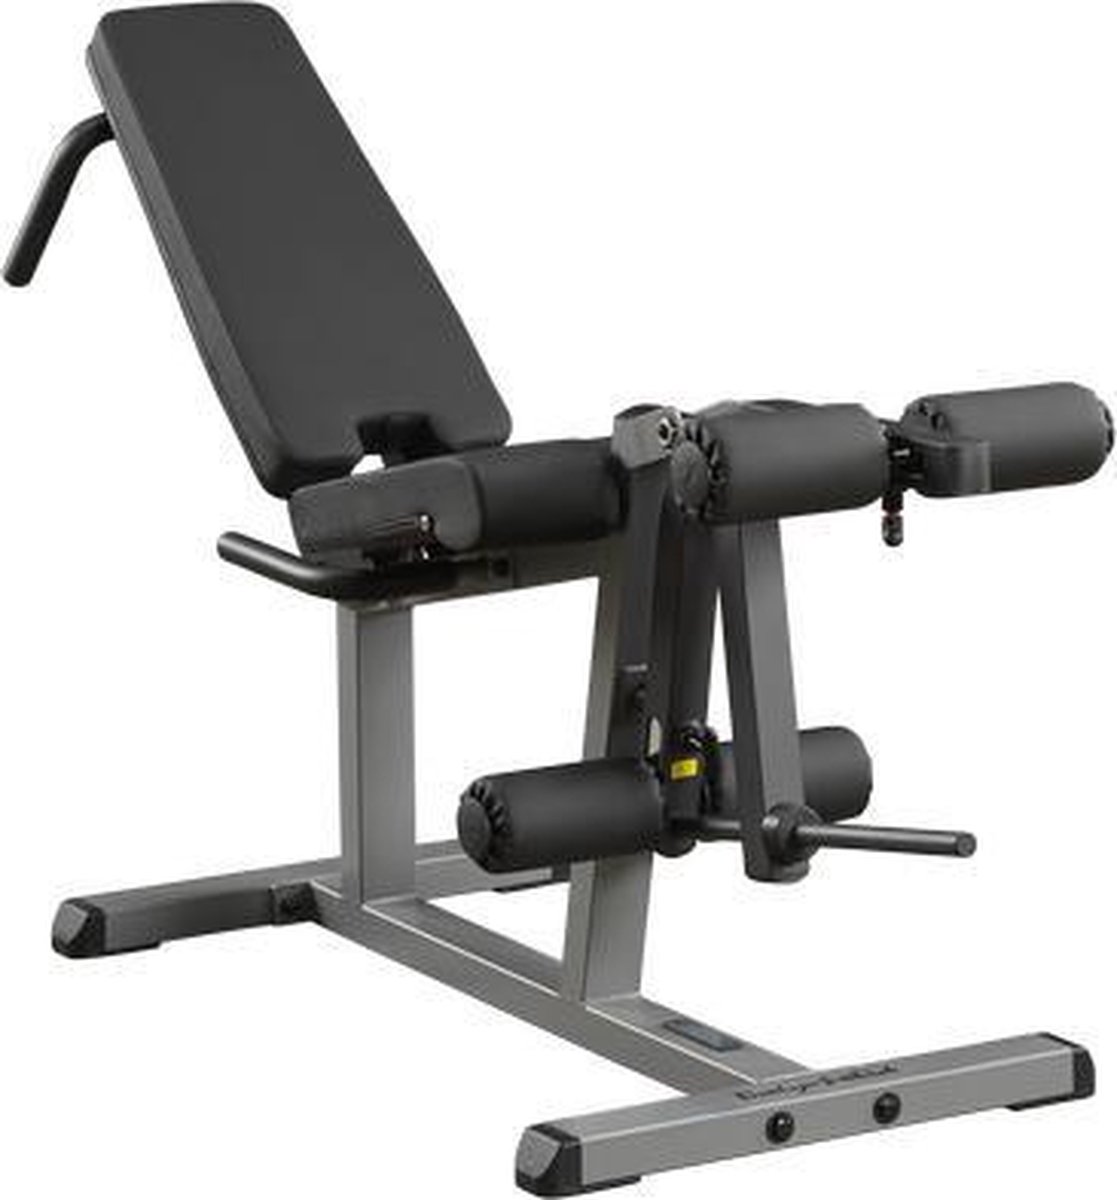 Body-Solid Seated Leg Extension & Leg Curl Glce365